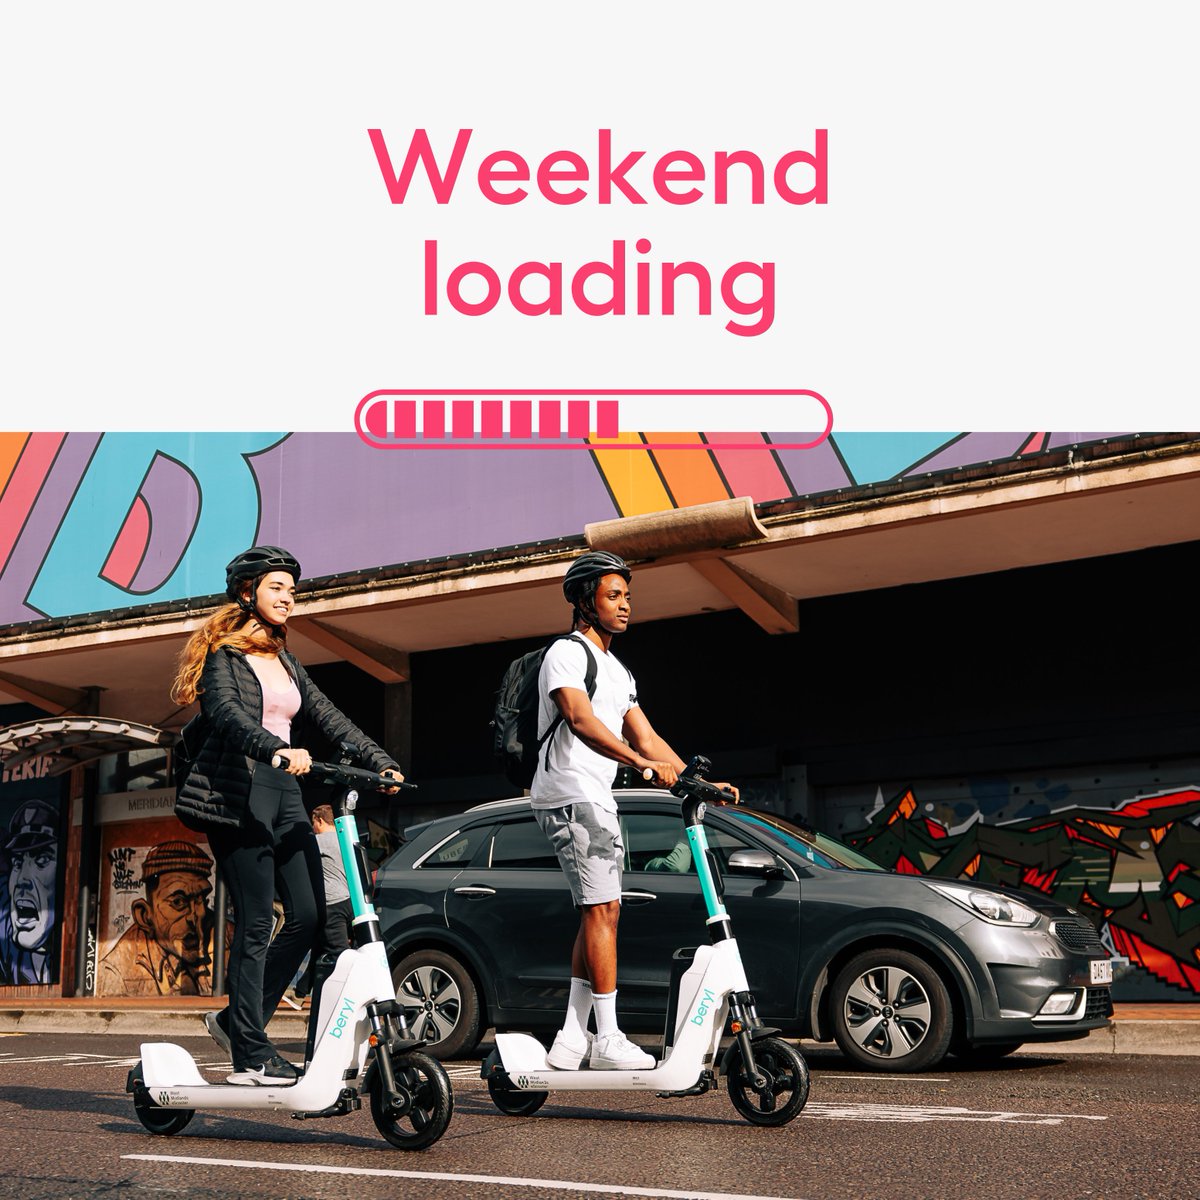 Friday are we glad to see you 🥰 Let us know what adventures you're chasing with Beryl this weekend 👇 #FridayFeeling #WeekendVibes #CommuteLife #ScooterLife #BikeLife #HappyFriday